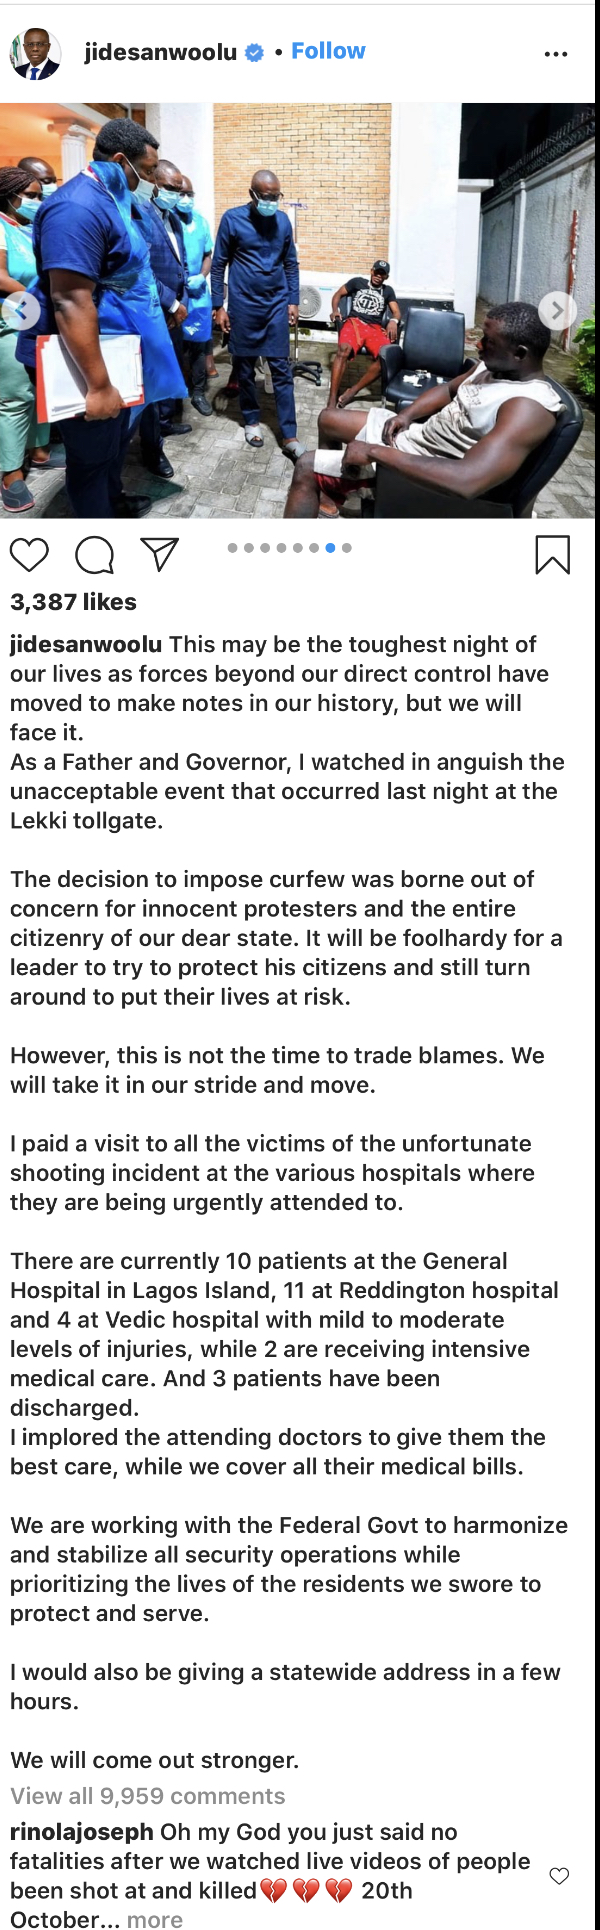 The governor’s statement